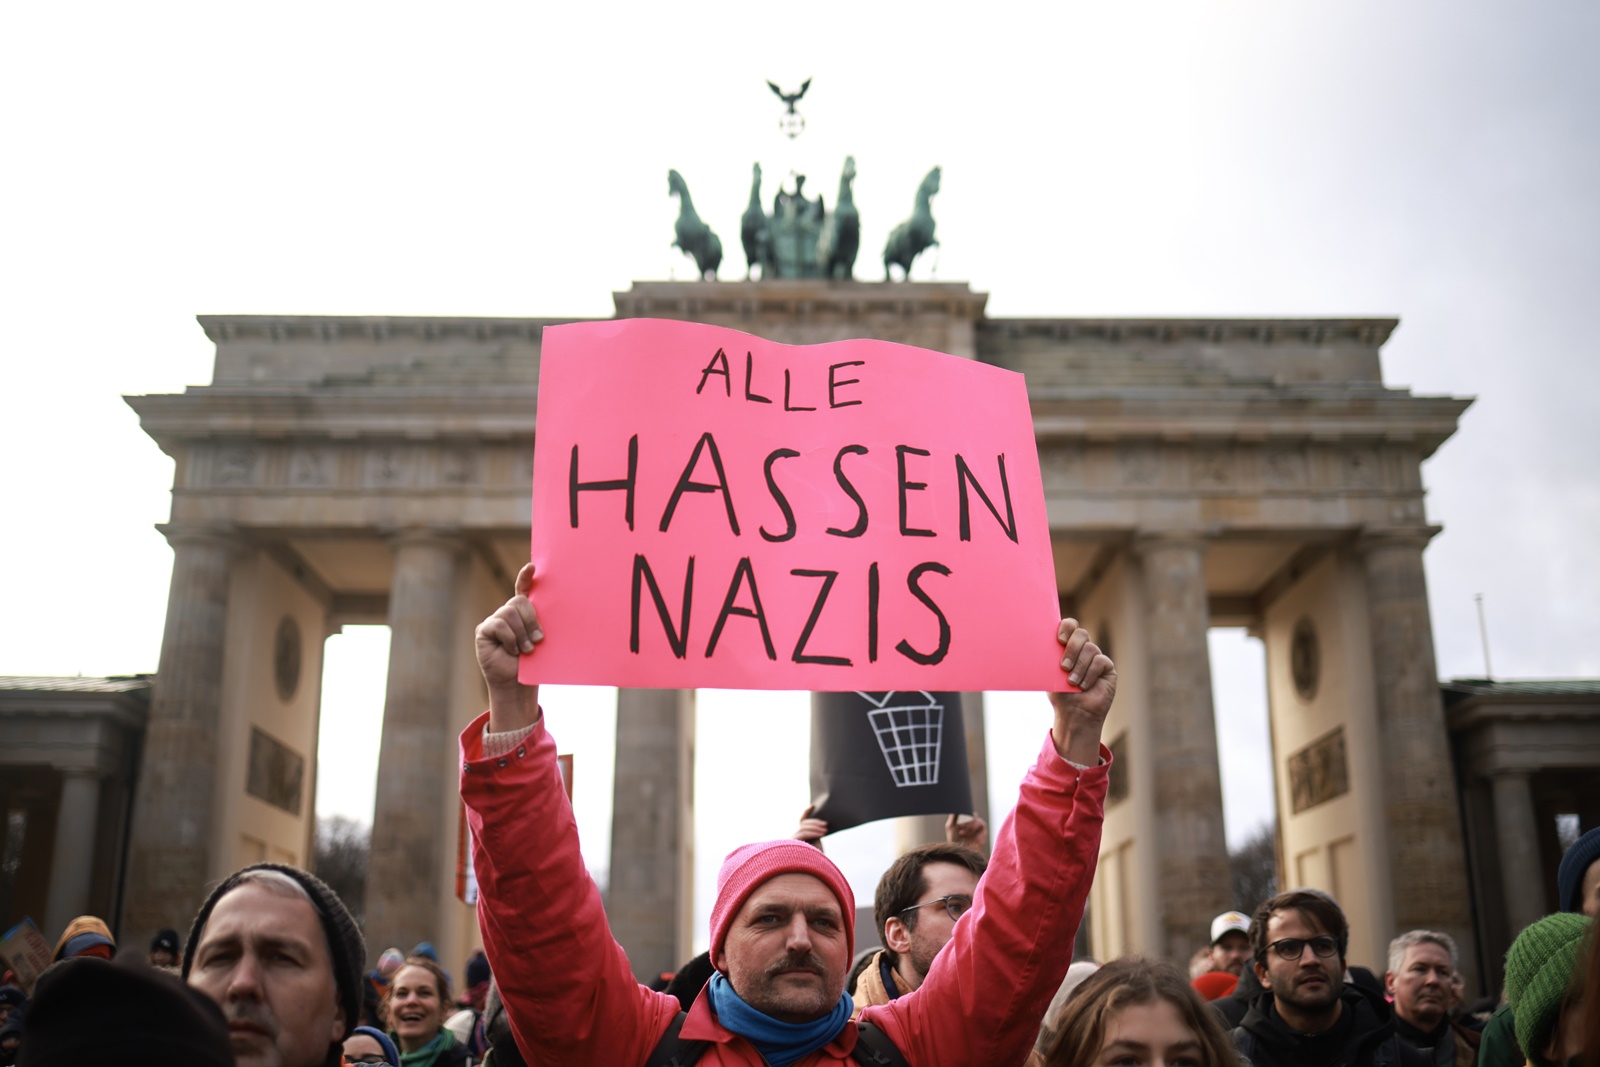 epa11076312 A protester holds a placard reading 'All hate Nazis' during a demonstration against the far-right Alternative for Germany (AfD) party in front of the Brandenburg Gate in Berlin, Germany, 14 January 2024. The protest held under the slogan 'Defend Democracy', was organized by the Fridays for Future movement, along with other non-governmental organizations, as a reaction to revelations of the investigative journalism group Correctiv, and their report about a meeting of far-right politicians, who allegedly discussed deportation plans referred to as 'remigration', a term promoting the forced return of 'migrants' to their place of origin.  EPA/CLEMENS BILAN